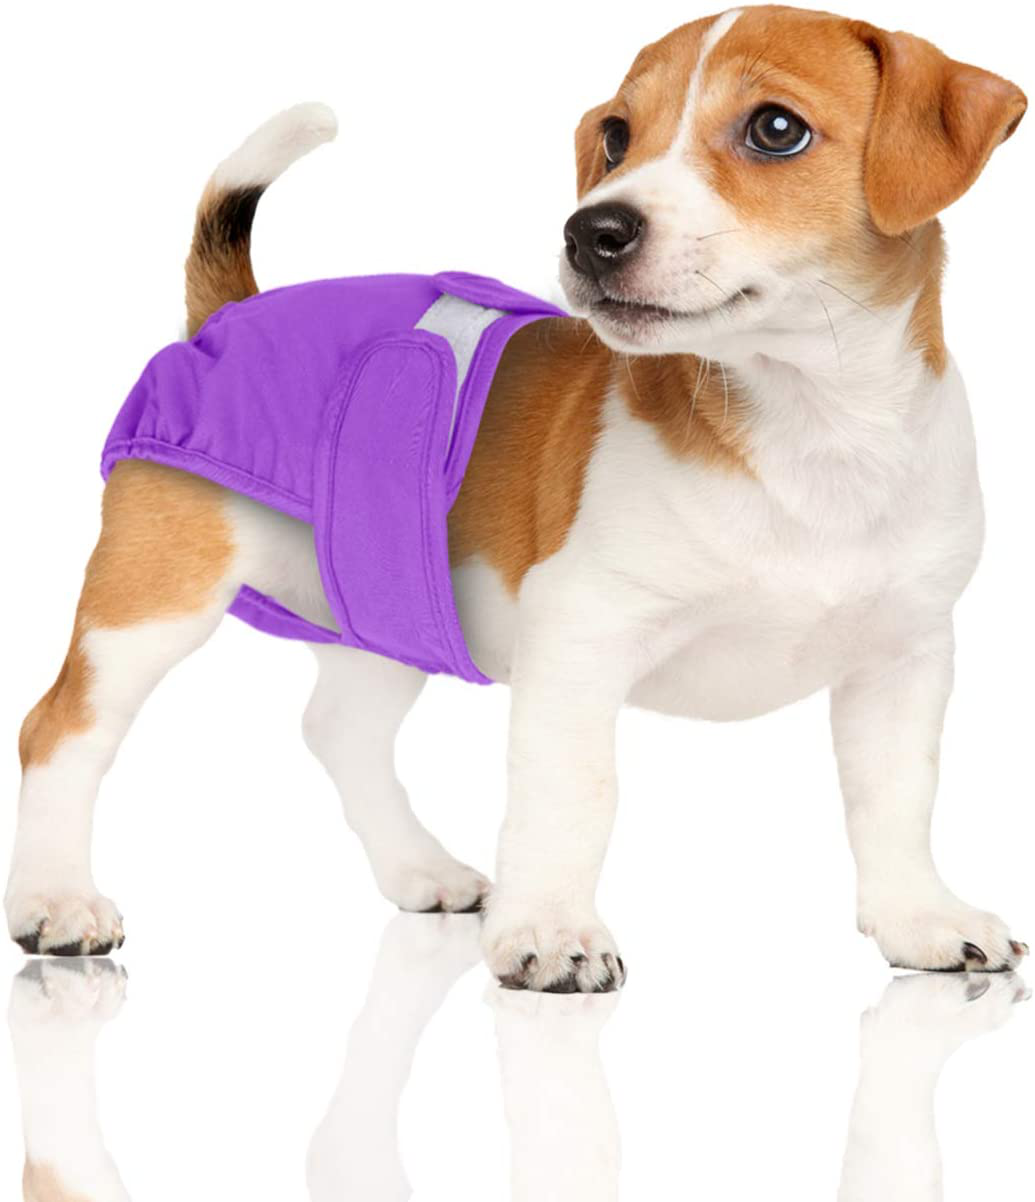 LUXJA Reusable Female Dog Diapers, Washable Wraps for Female Dog